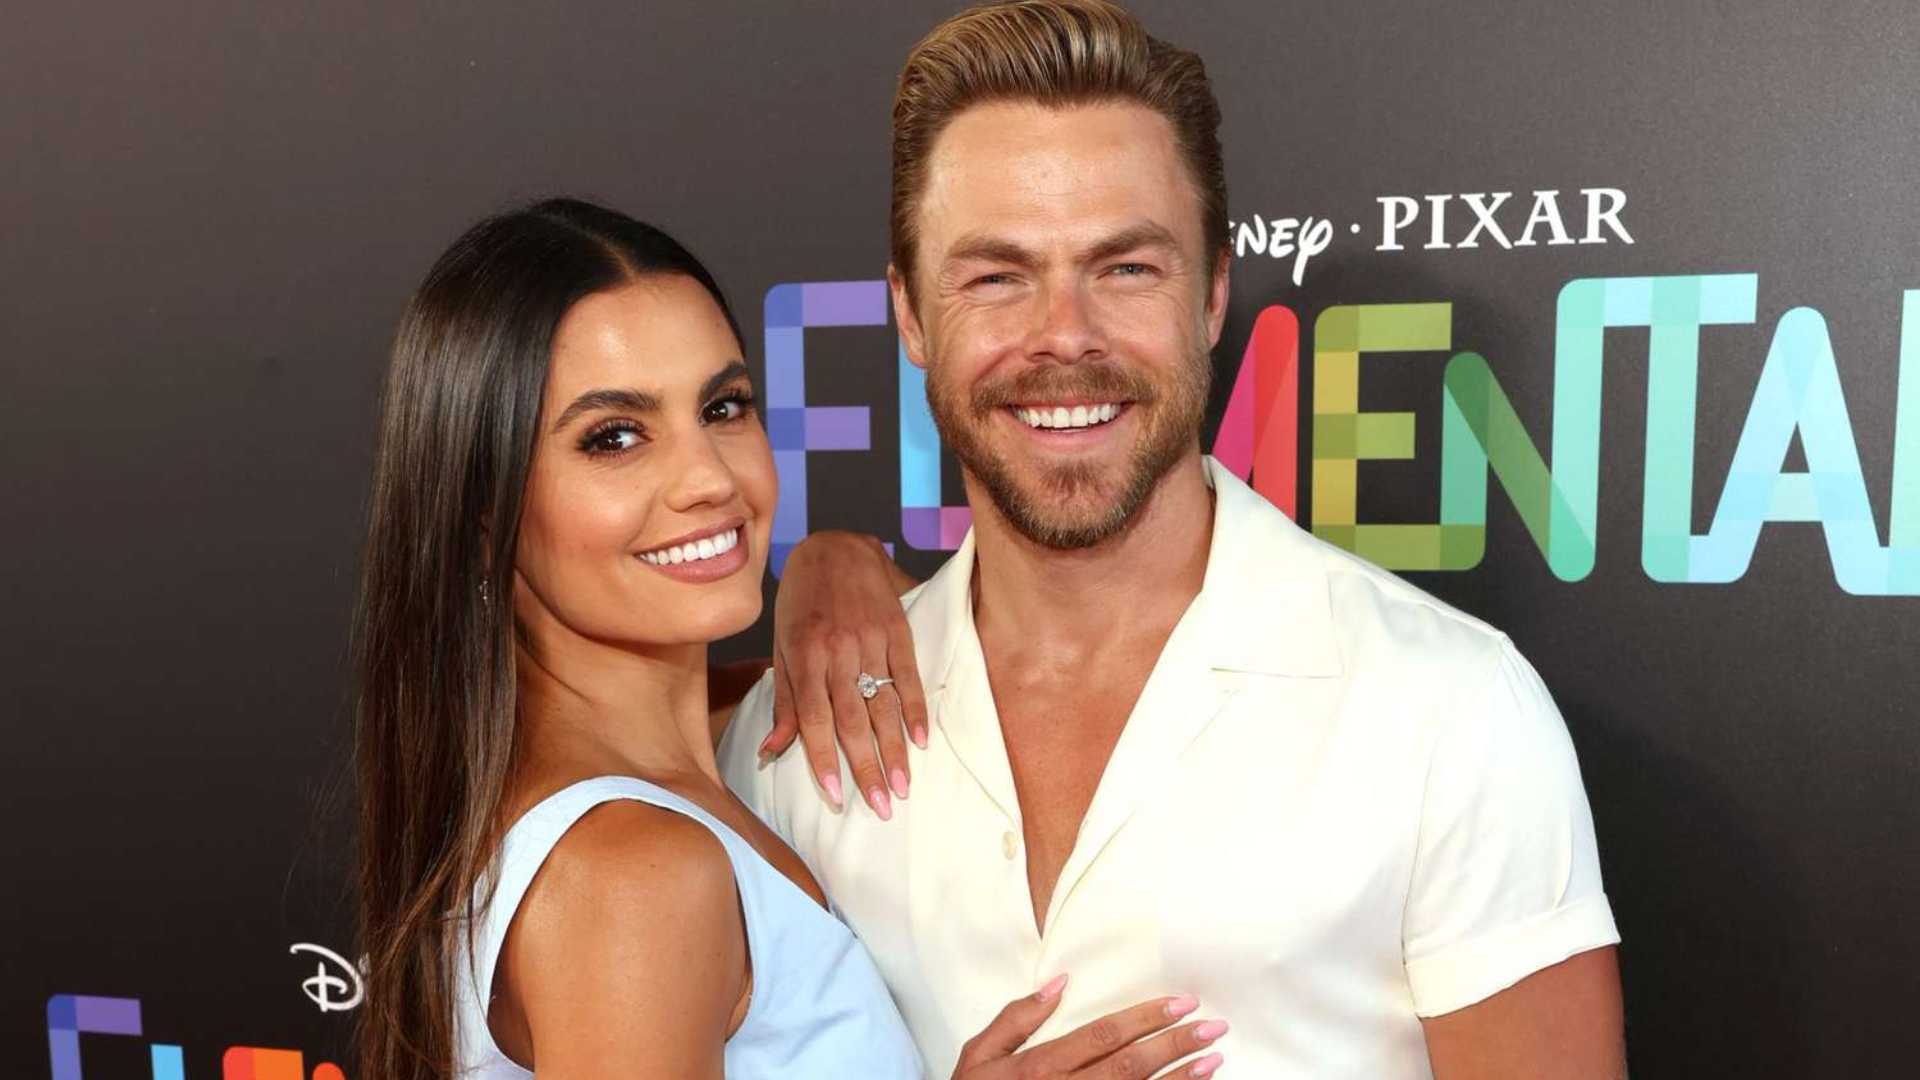 Derek Hough and Hayley Erbert stepped out in public for the first time since her cranial hematoma surgery